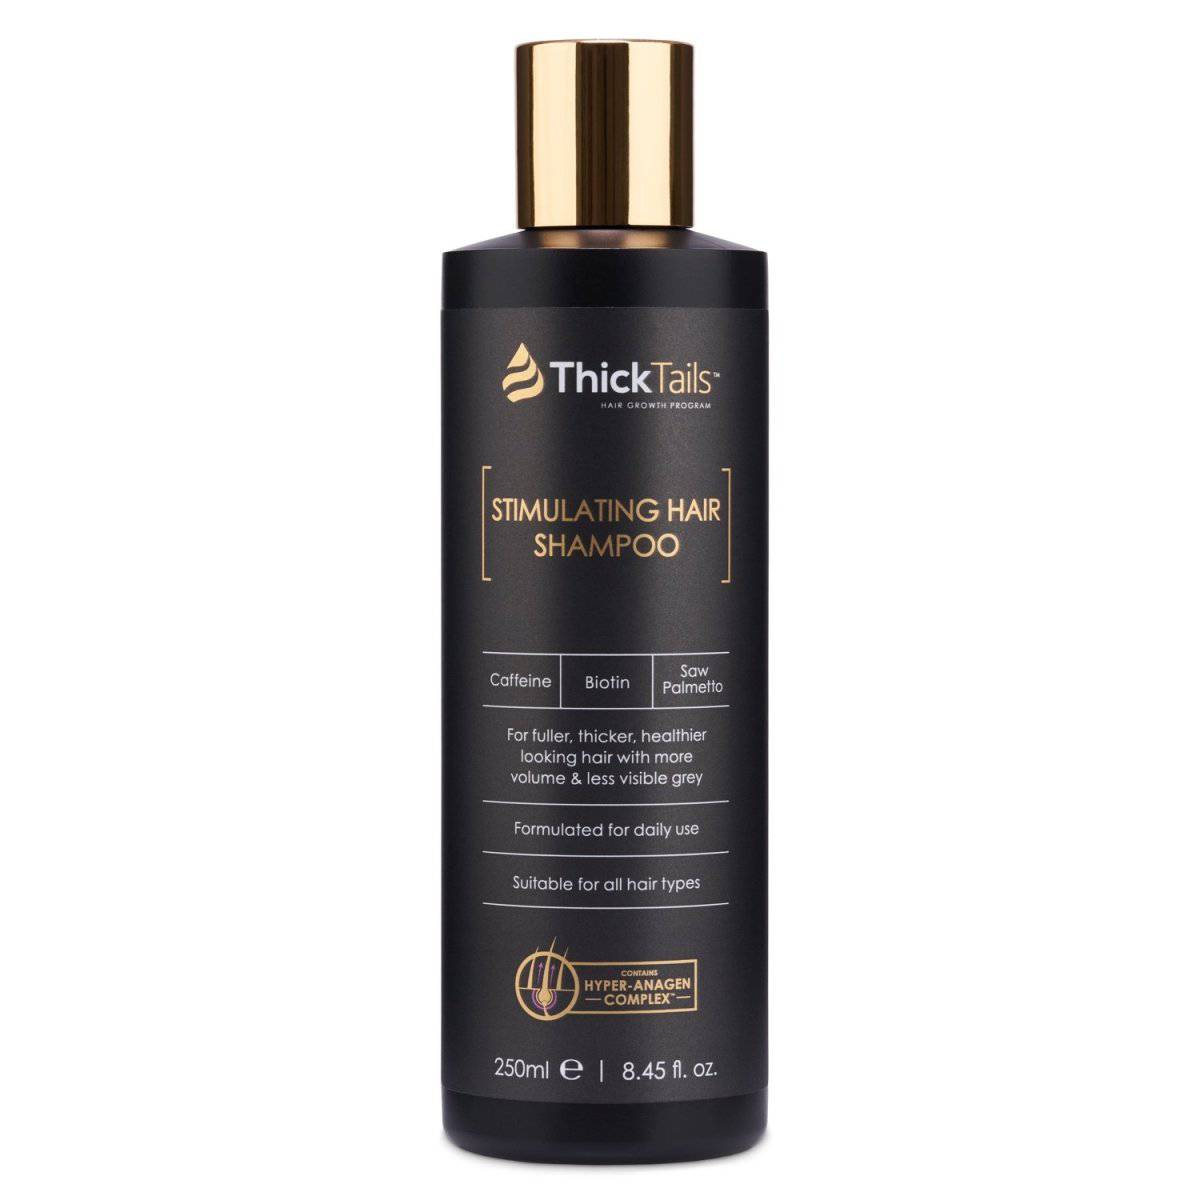 ThickTails Hair Growth Shampoo For Women - For Thinning Hair & Breakage Due to Menopause, Stress, Postpartum Recovery. Anti Hair Loss Shampoo For Hair Regrowth. DHT Blocking Shampoo. Biotin Caffeine